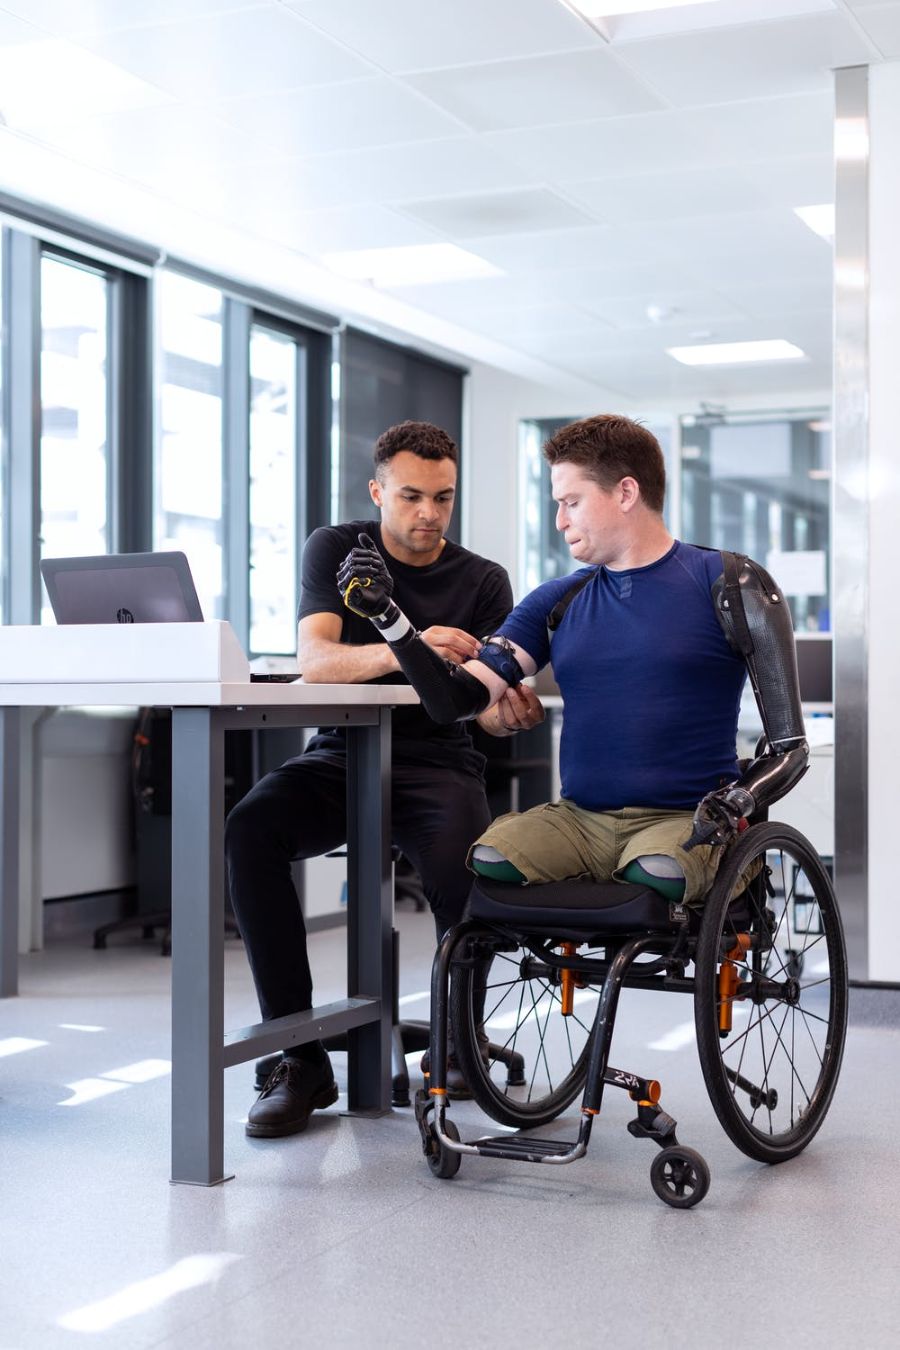 Male professional adjusting prosthetic arm for a disabled person in a wheelchair.